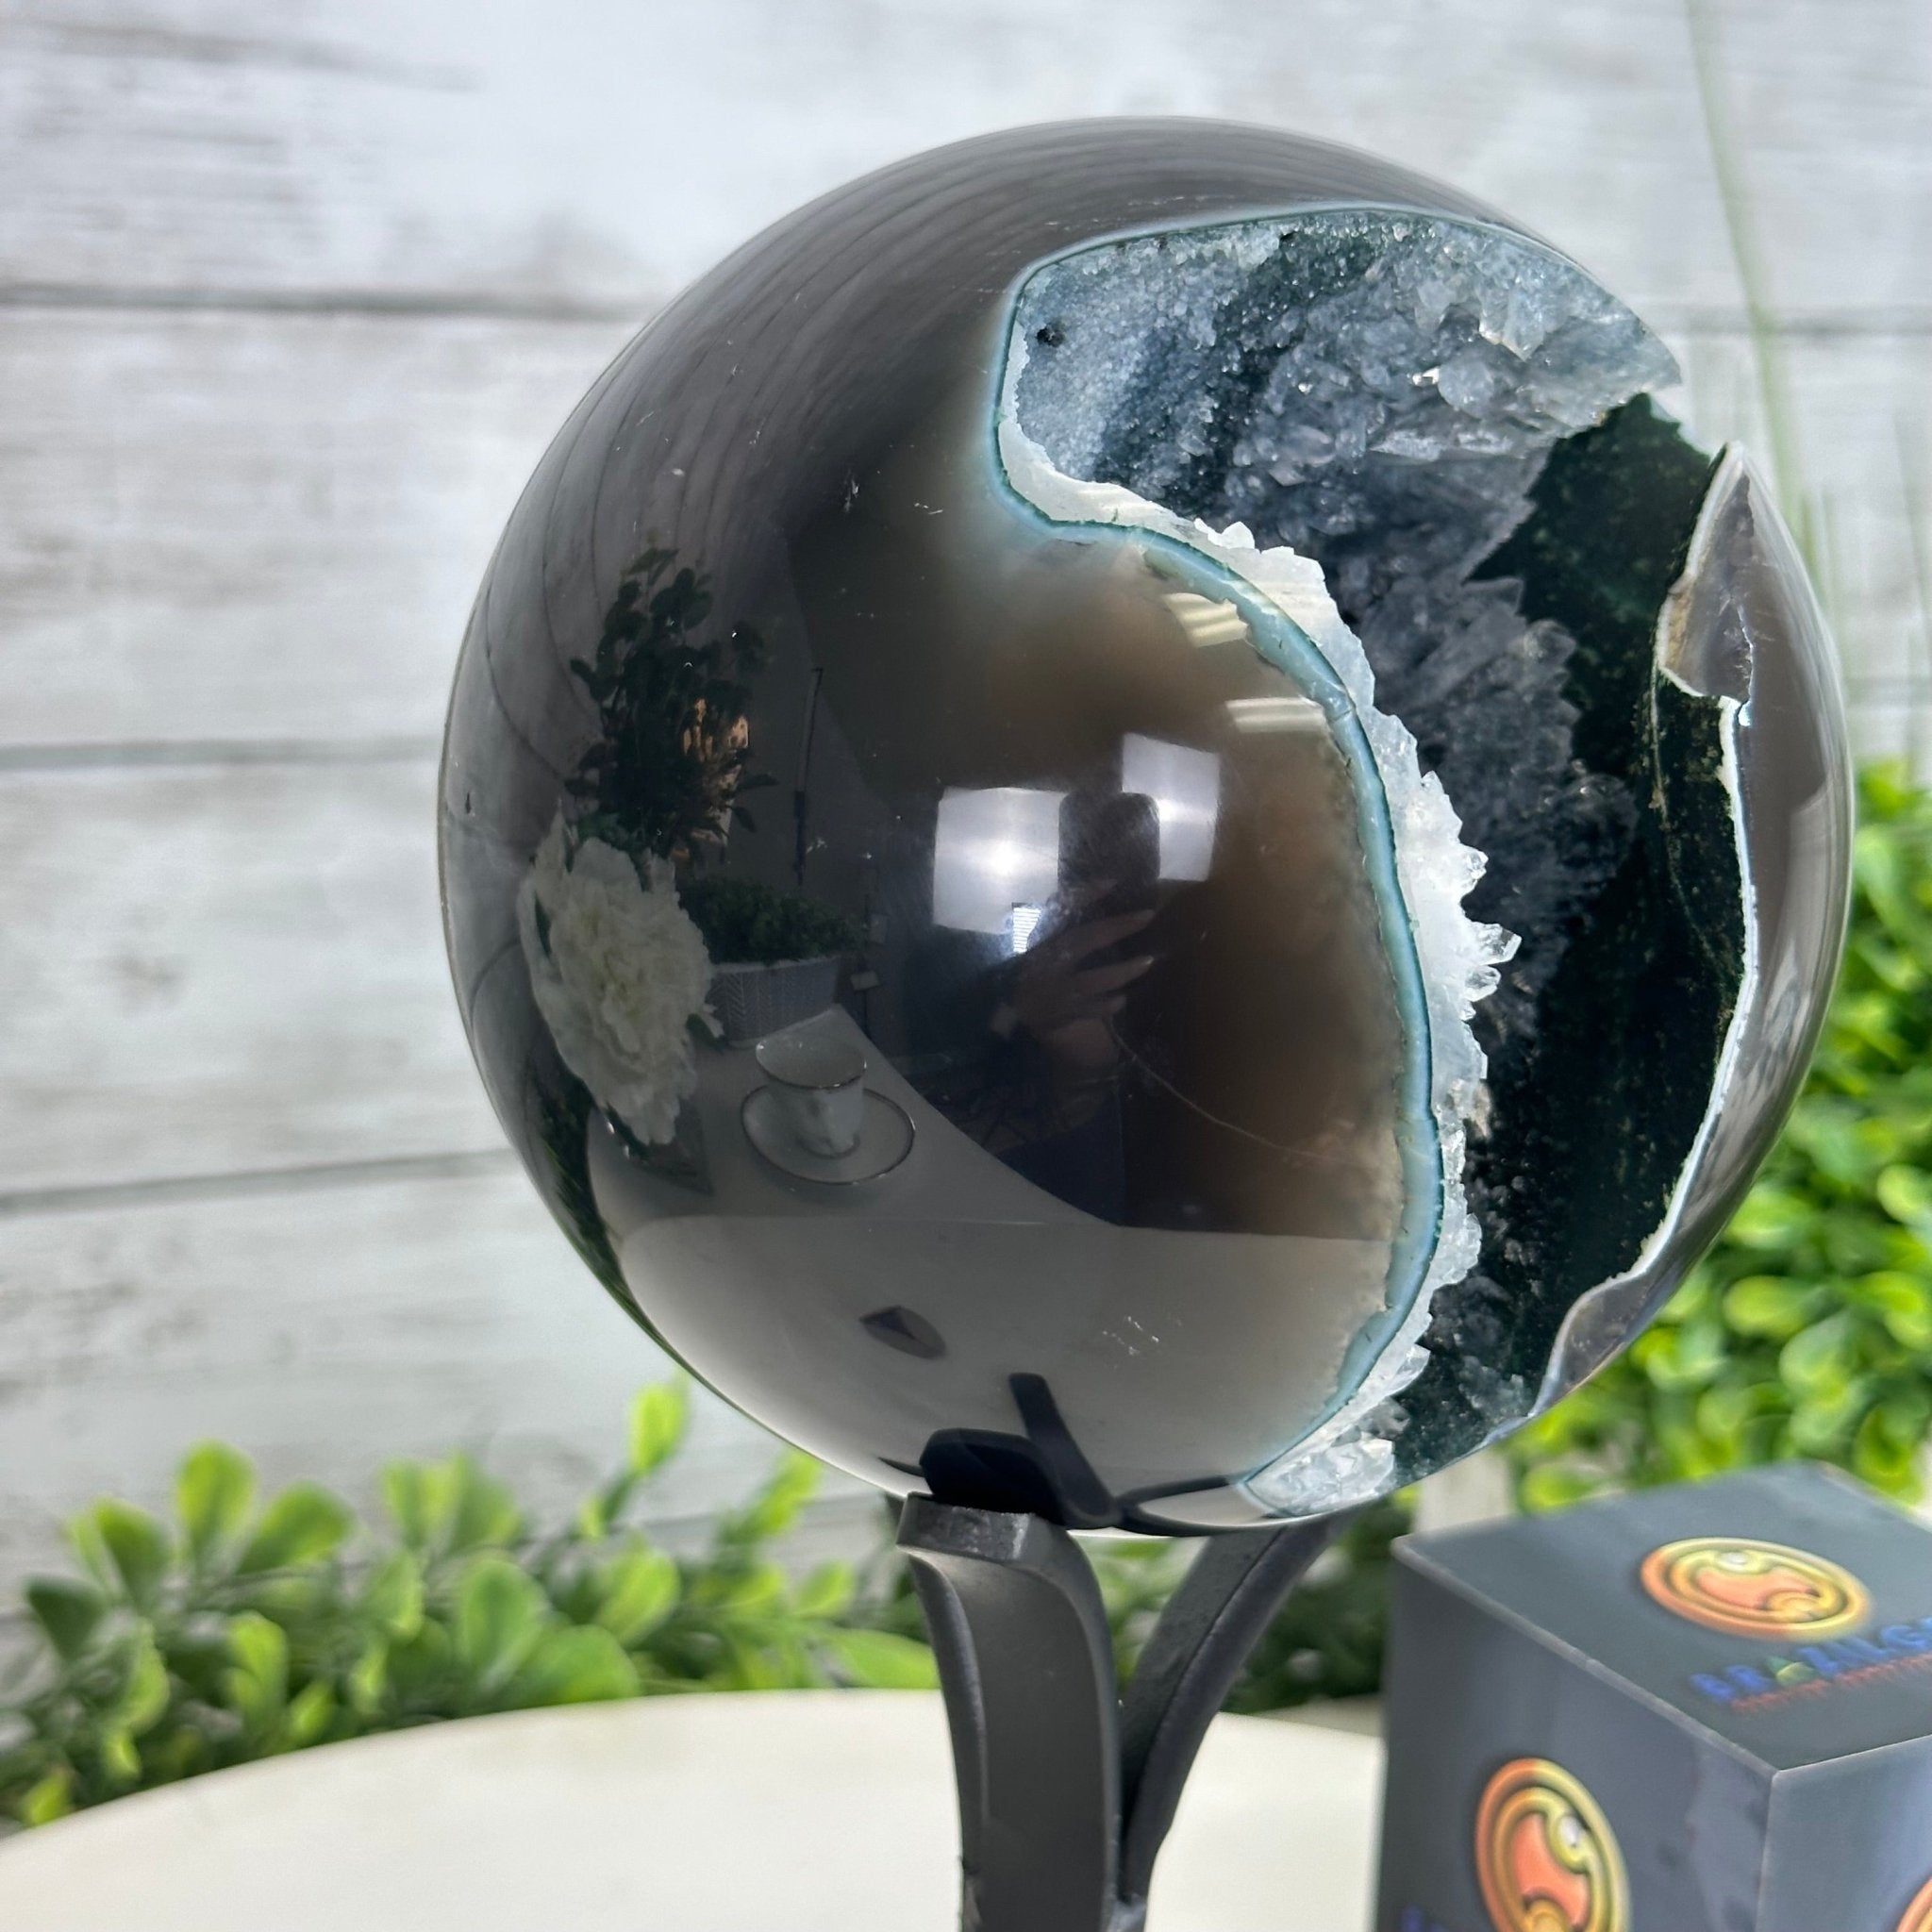 Druzy Agate Sphere on a Metal Stand, 3.9 lbs & 9.1" Tall #5634-0009 - Brazil GemsBrazil GemsDruzy Agate Sphere on a Metal Stand, 3.9 lbs & 9.1" Tall #5634-0009Spheres5634-0009